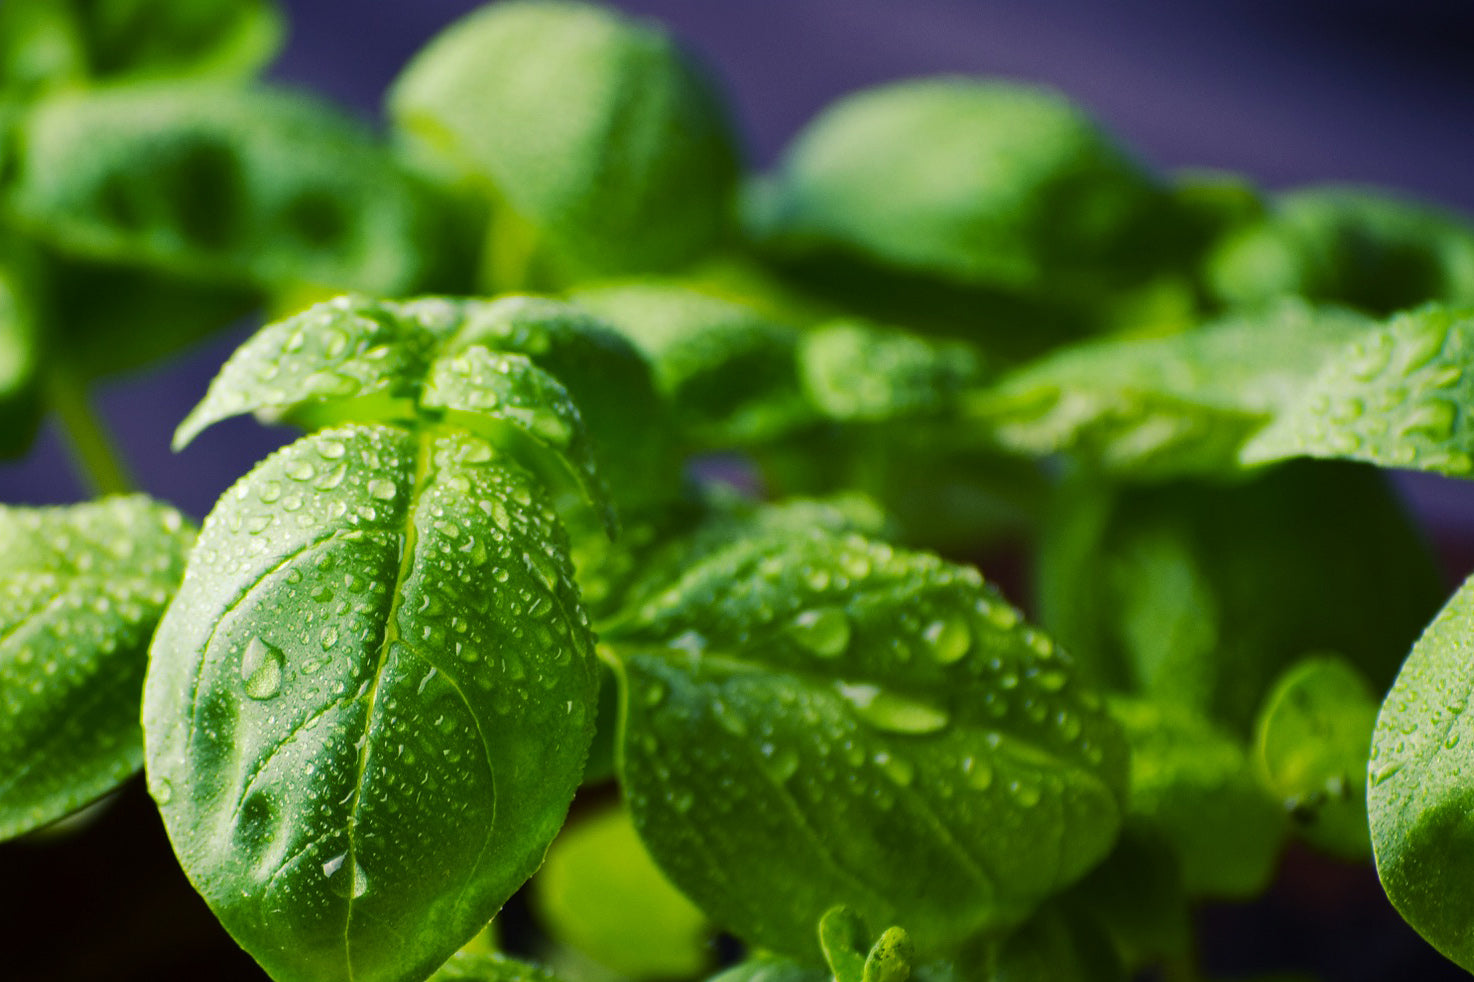 How to grow basil (and other herbs)